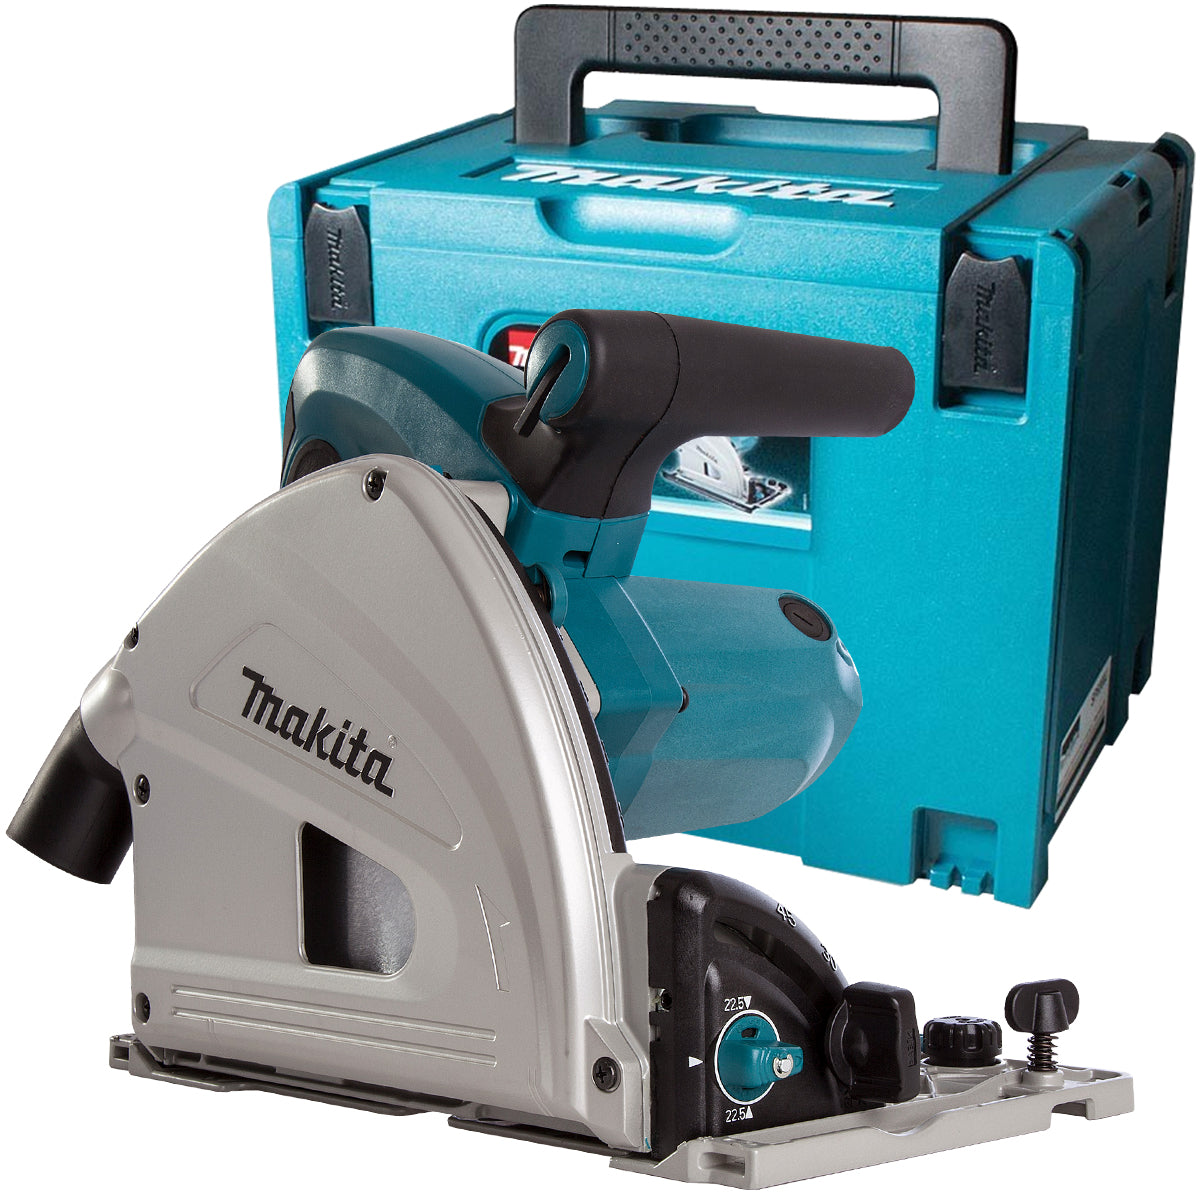 Makita SP6000J1 240V 165mm Plunge Saw in Case with 2 x Guide Rail Connector Bar & Clamp